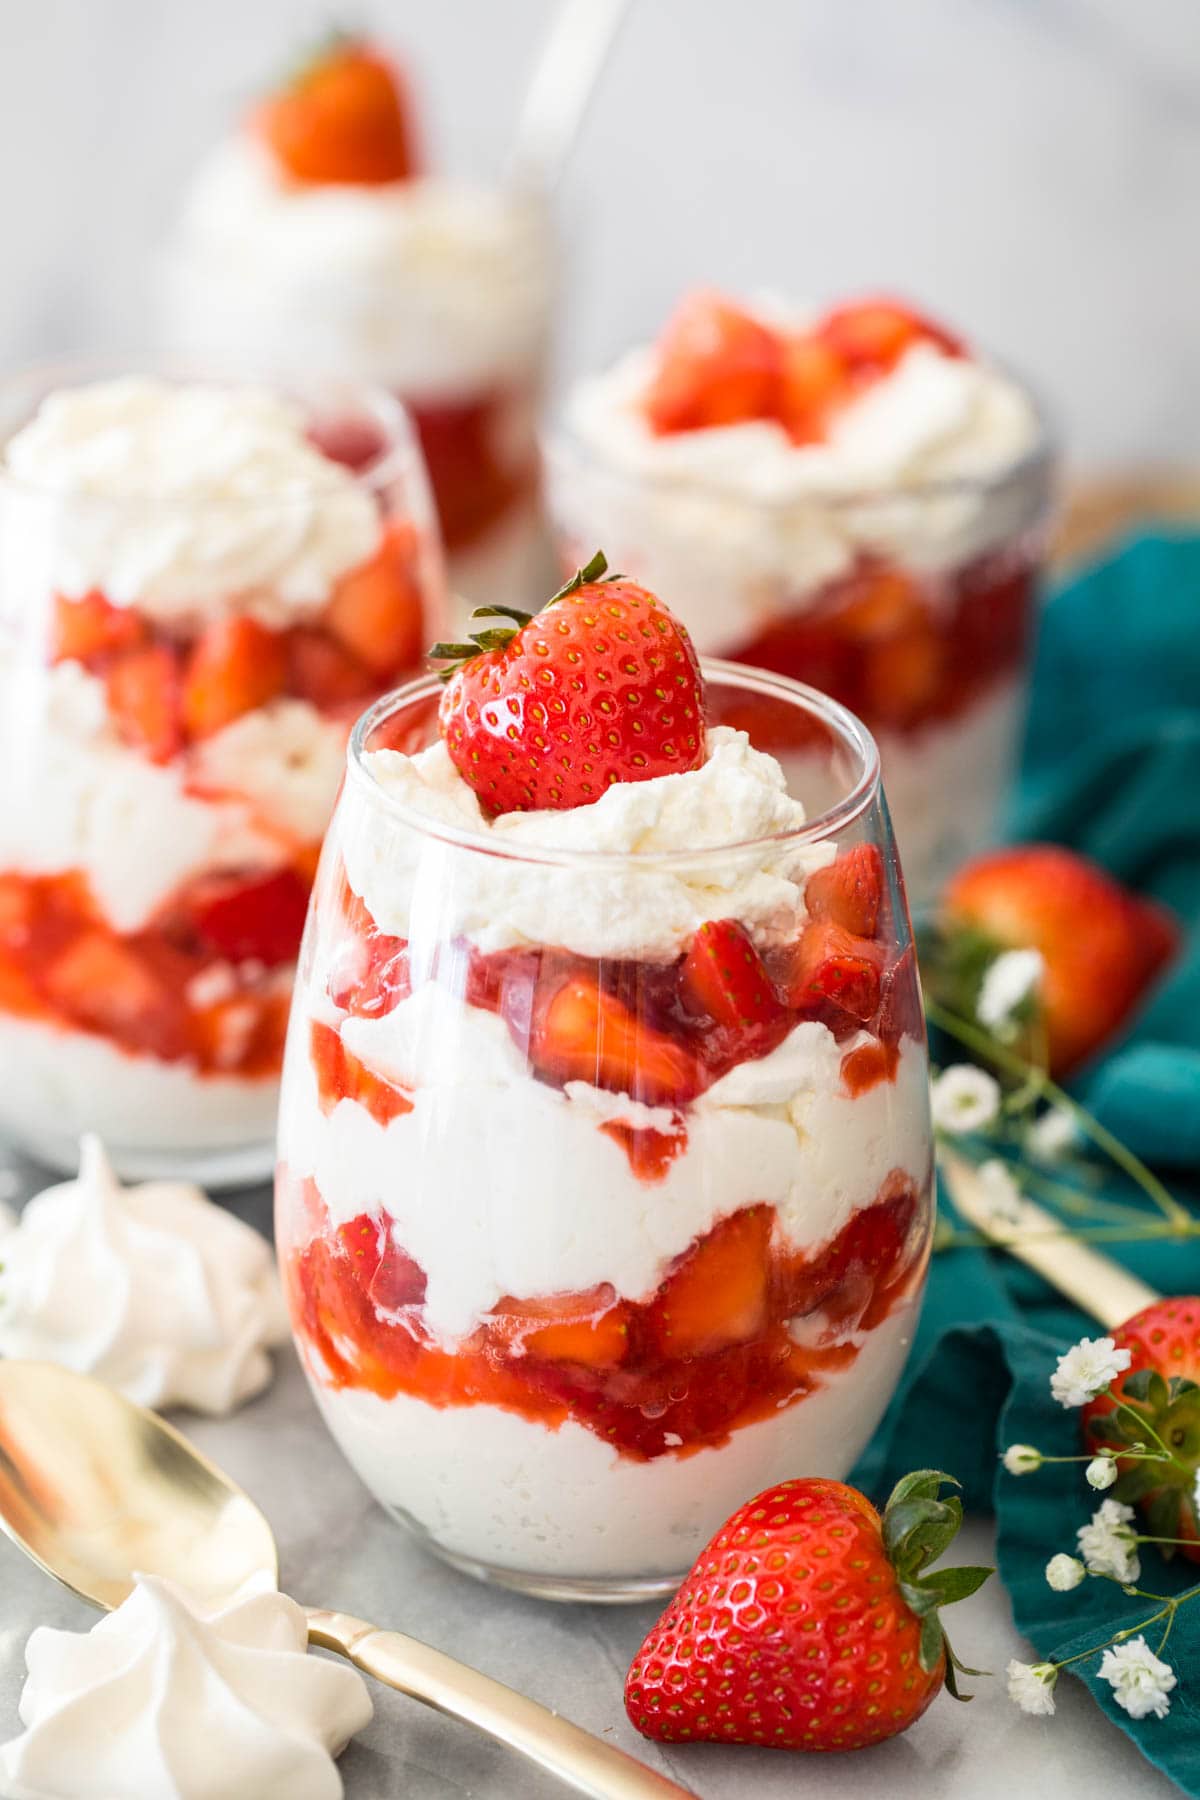 glasses of eton mess (layers of whipped cream/meringue and strawberries)